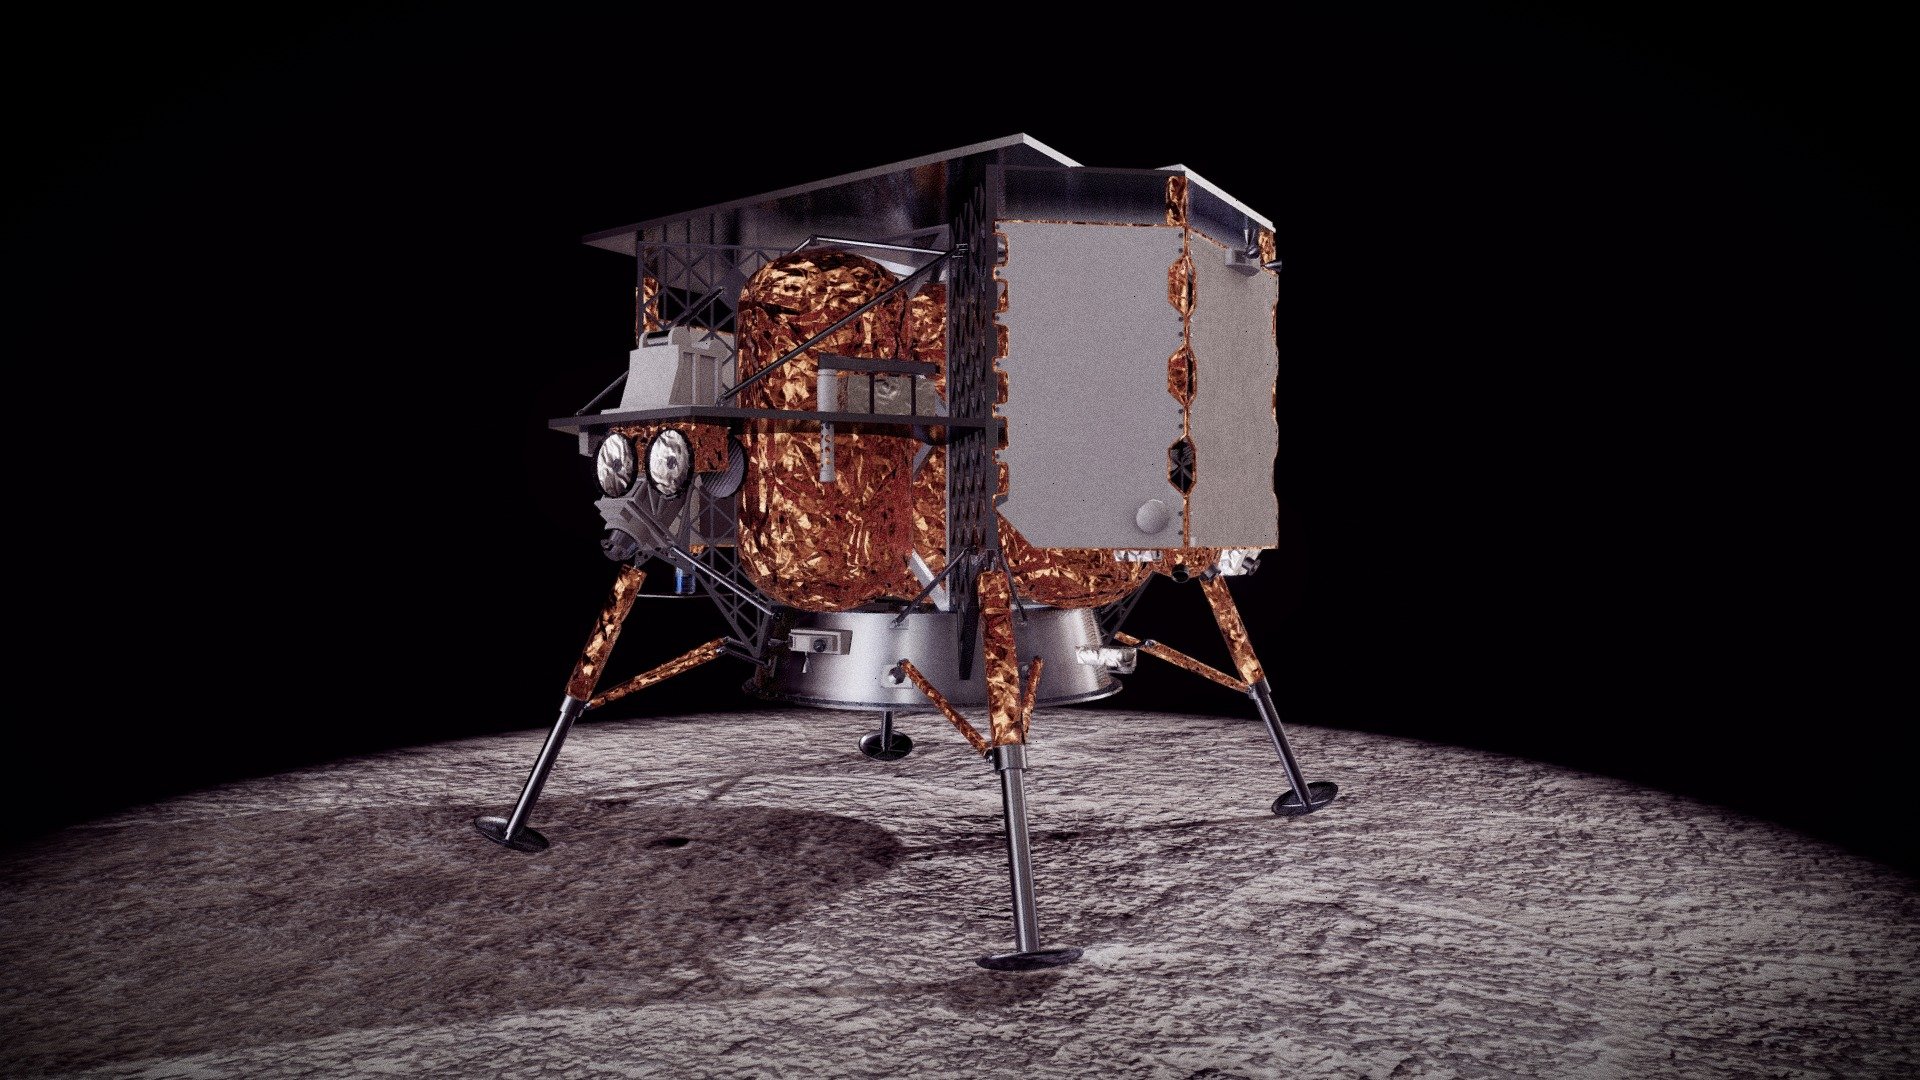 Peregrine Mission 1 (TO2-AB), or the Peregrine Lunar Lander, carrying scientific and other payloads to the Moon, is planned to touch down on the lunar surface on Sinus Viscositatis. The scientific objectives of the mission are to study the lunar exosphere, thermal properties and hydrogen abundance of the lunar regolith, magnetic fields, and the radiation environment. It will also test advanced solar arrays 3d model